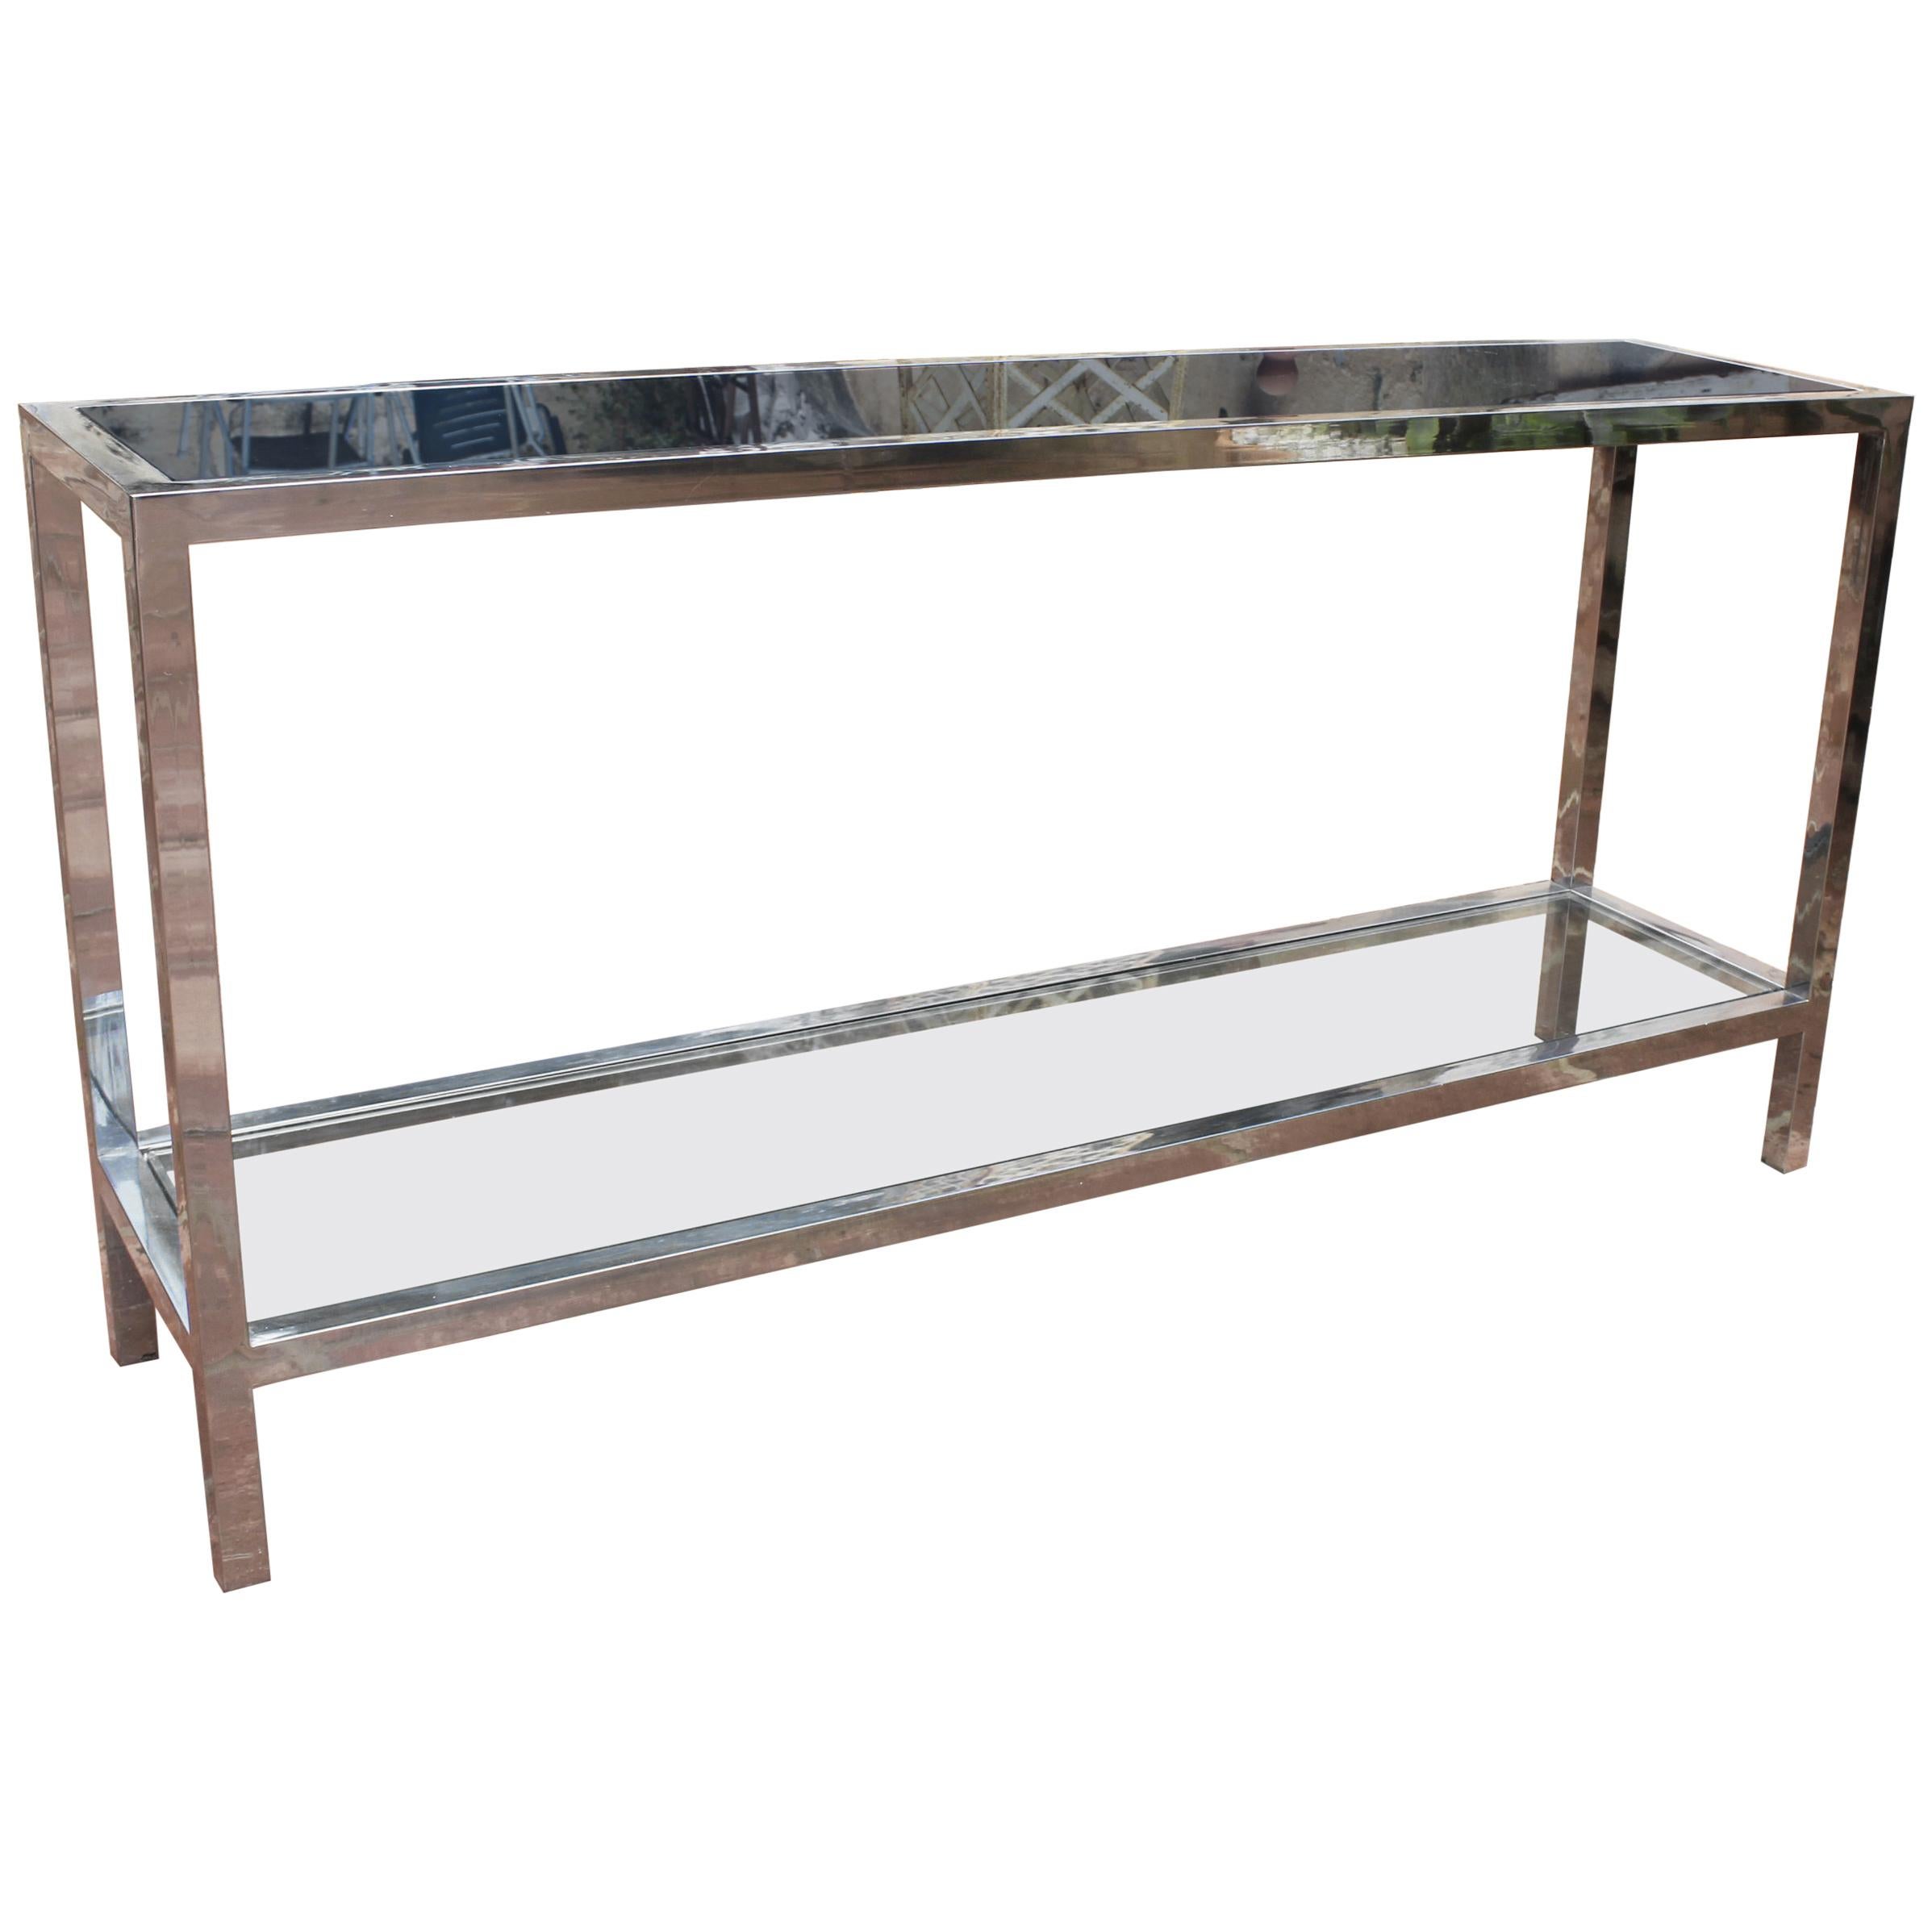 1970s Italian Stainless Steel Console Table with Period Smoked Glass Top